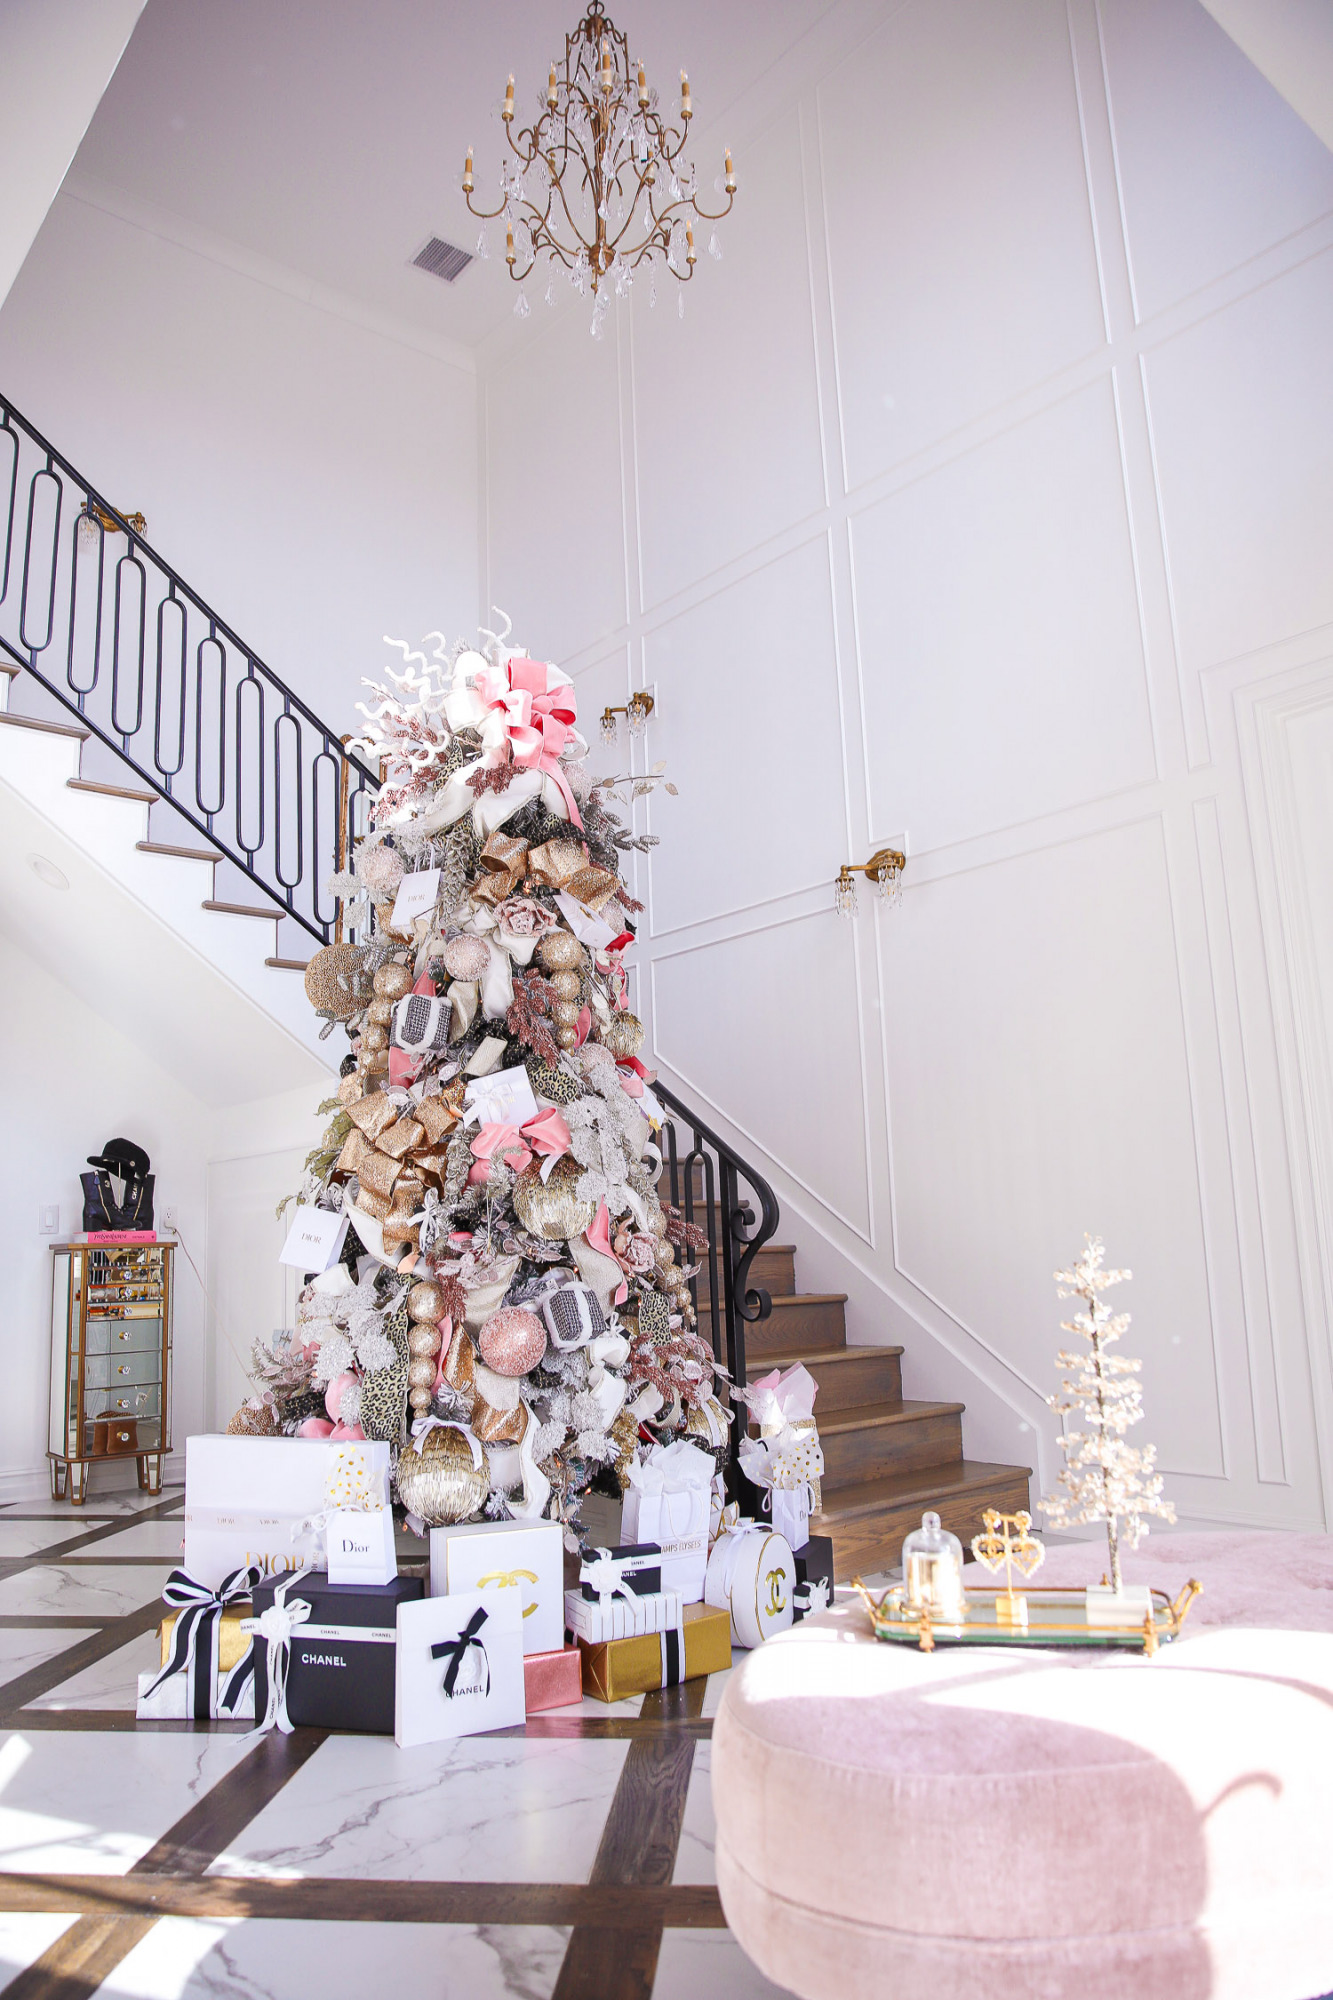 two story closet pinterest, designer chanel christmas tree, unique christmas trees, shop hello holidays, emily gemma christmas tree | Pink and Gold Christmas Tree by popular US life and style blog, The Sweetest Thing: image of a two story closet decorated with pink and gold Christmas Tree with high end retailer bags underneath. 